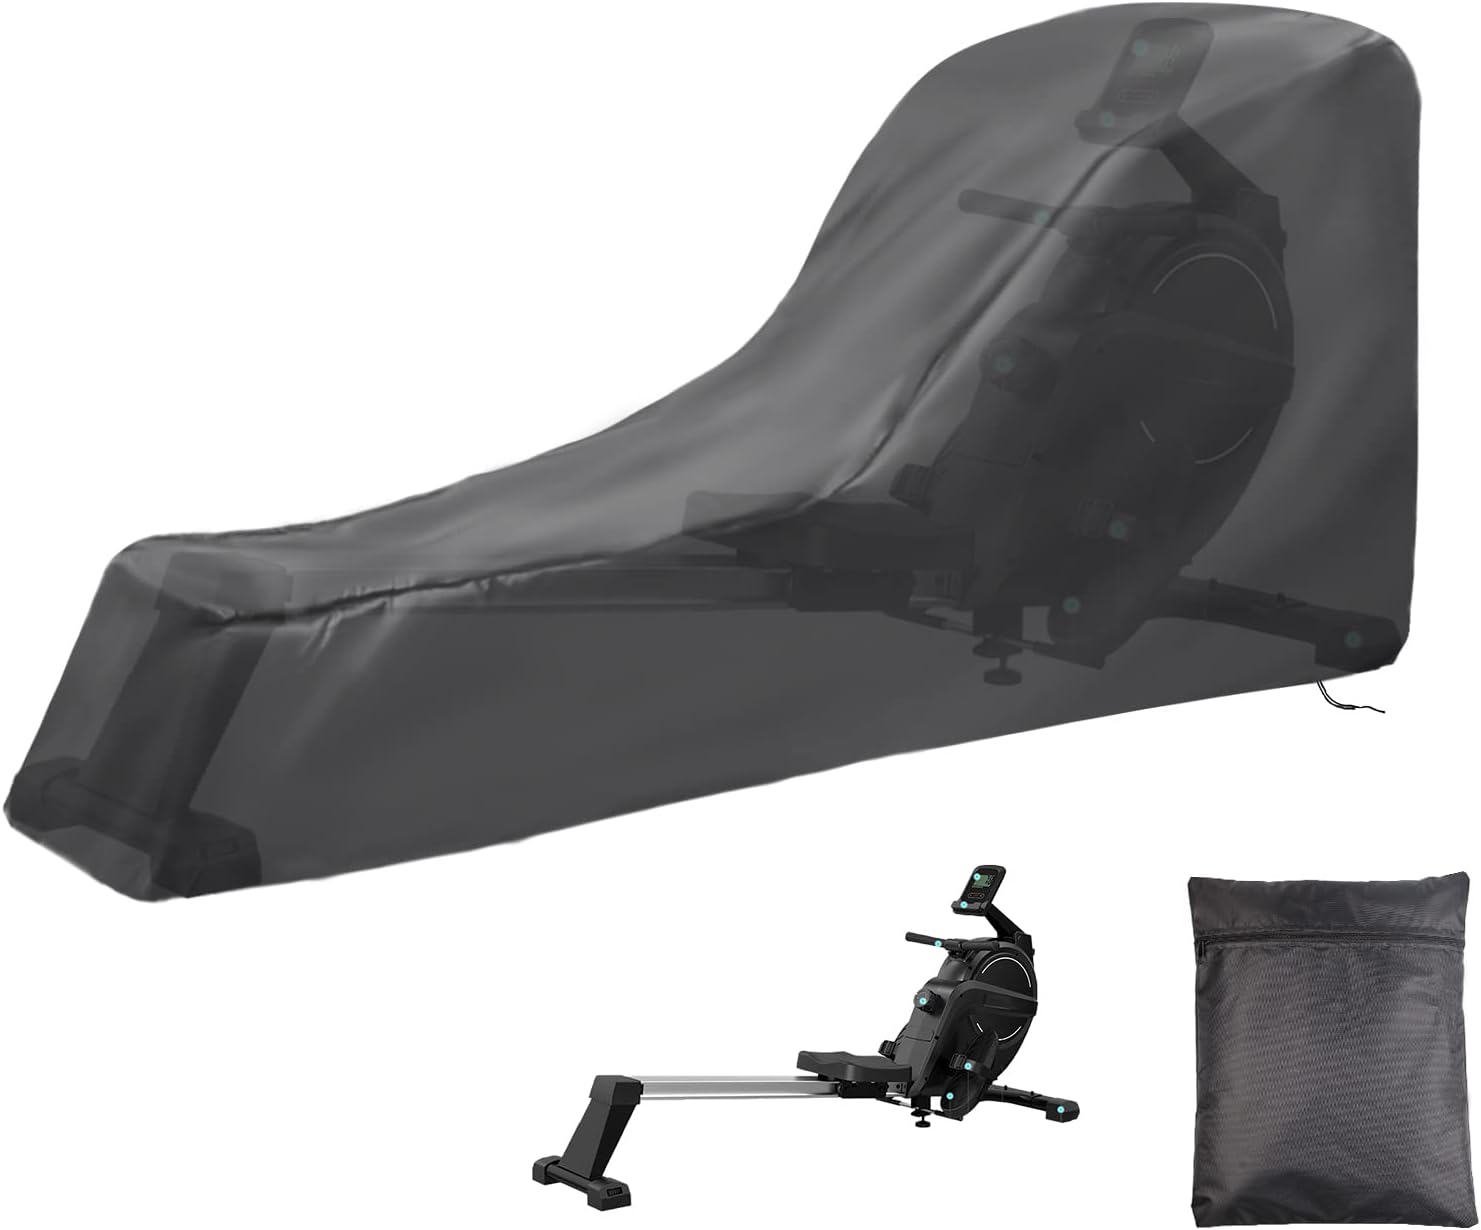 Andacar Rowing Machine Cover Review